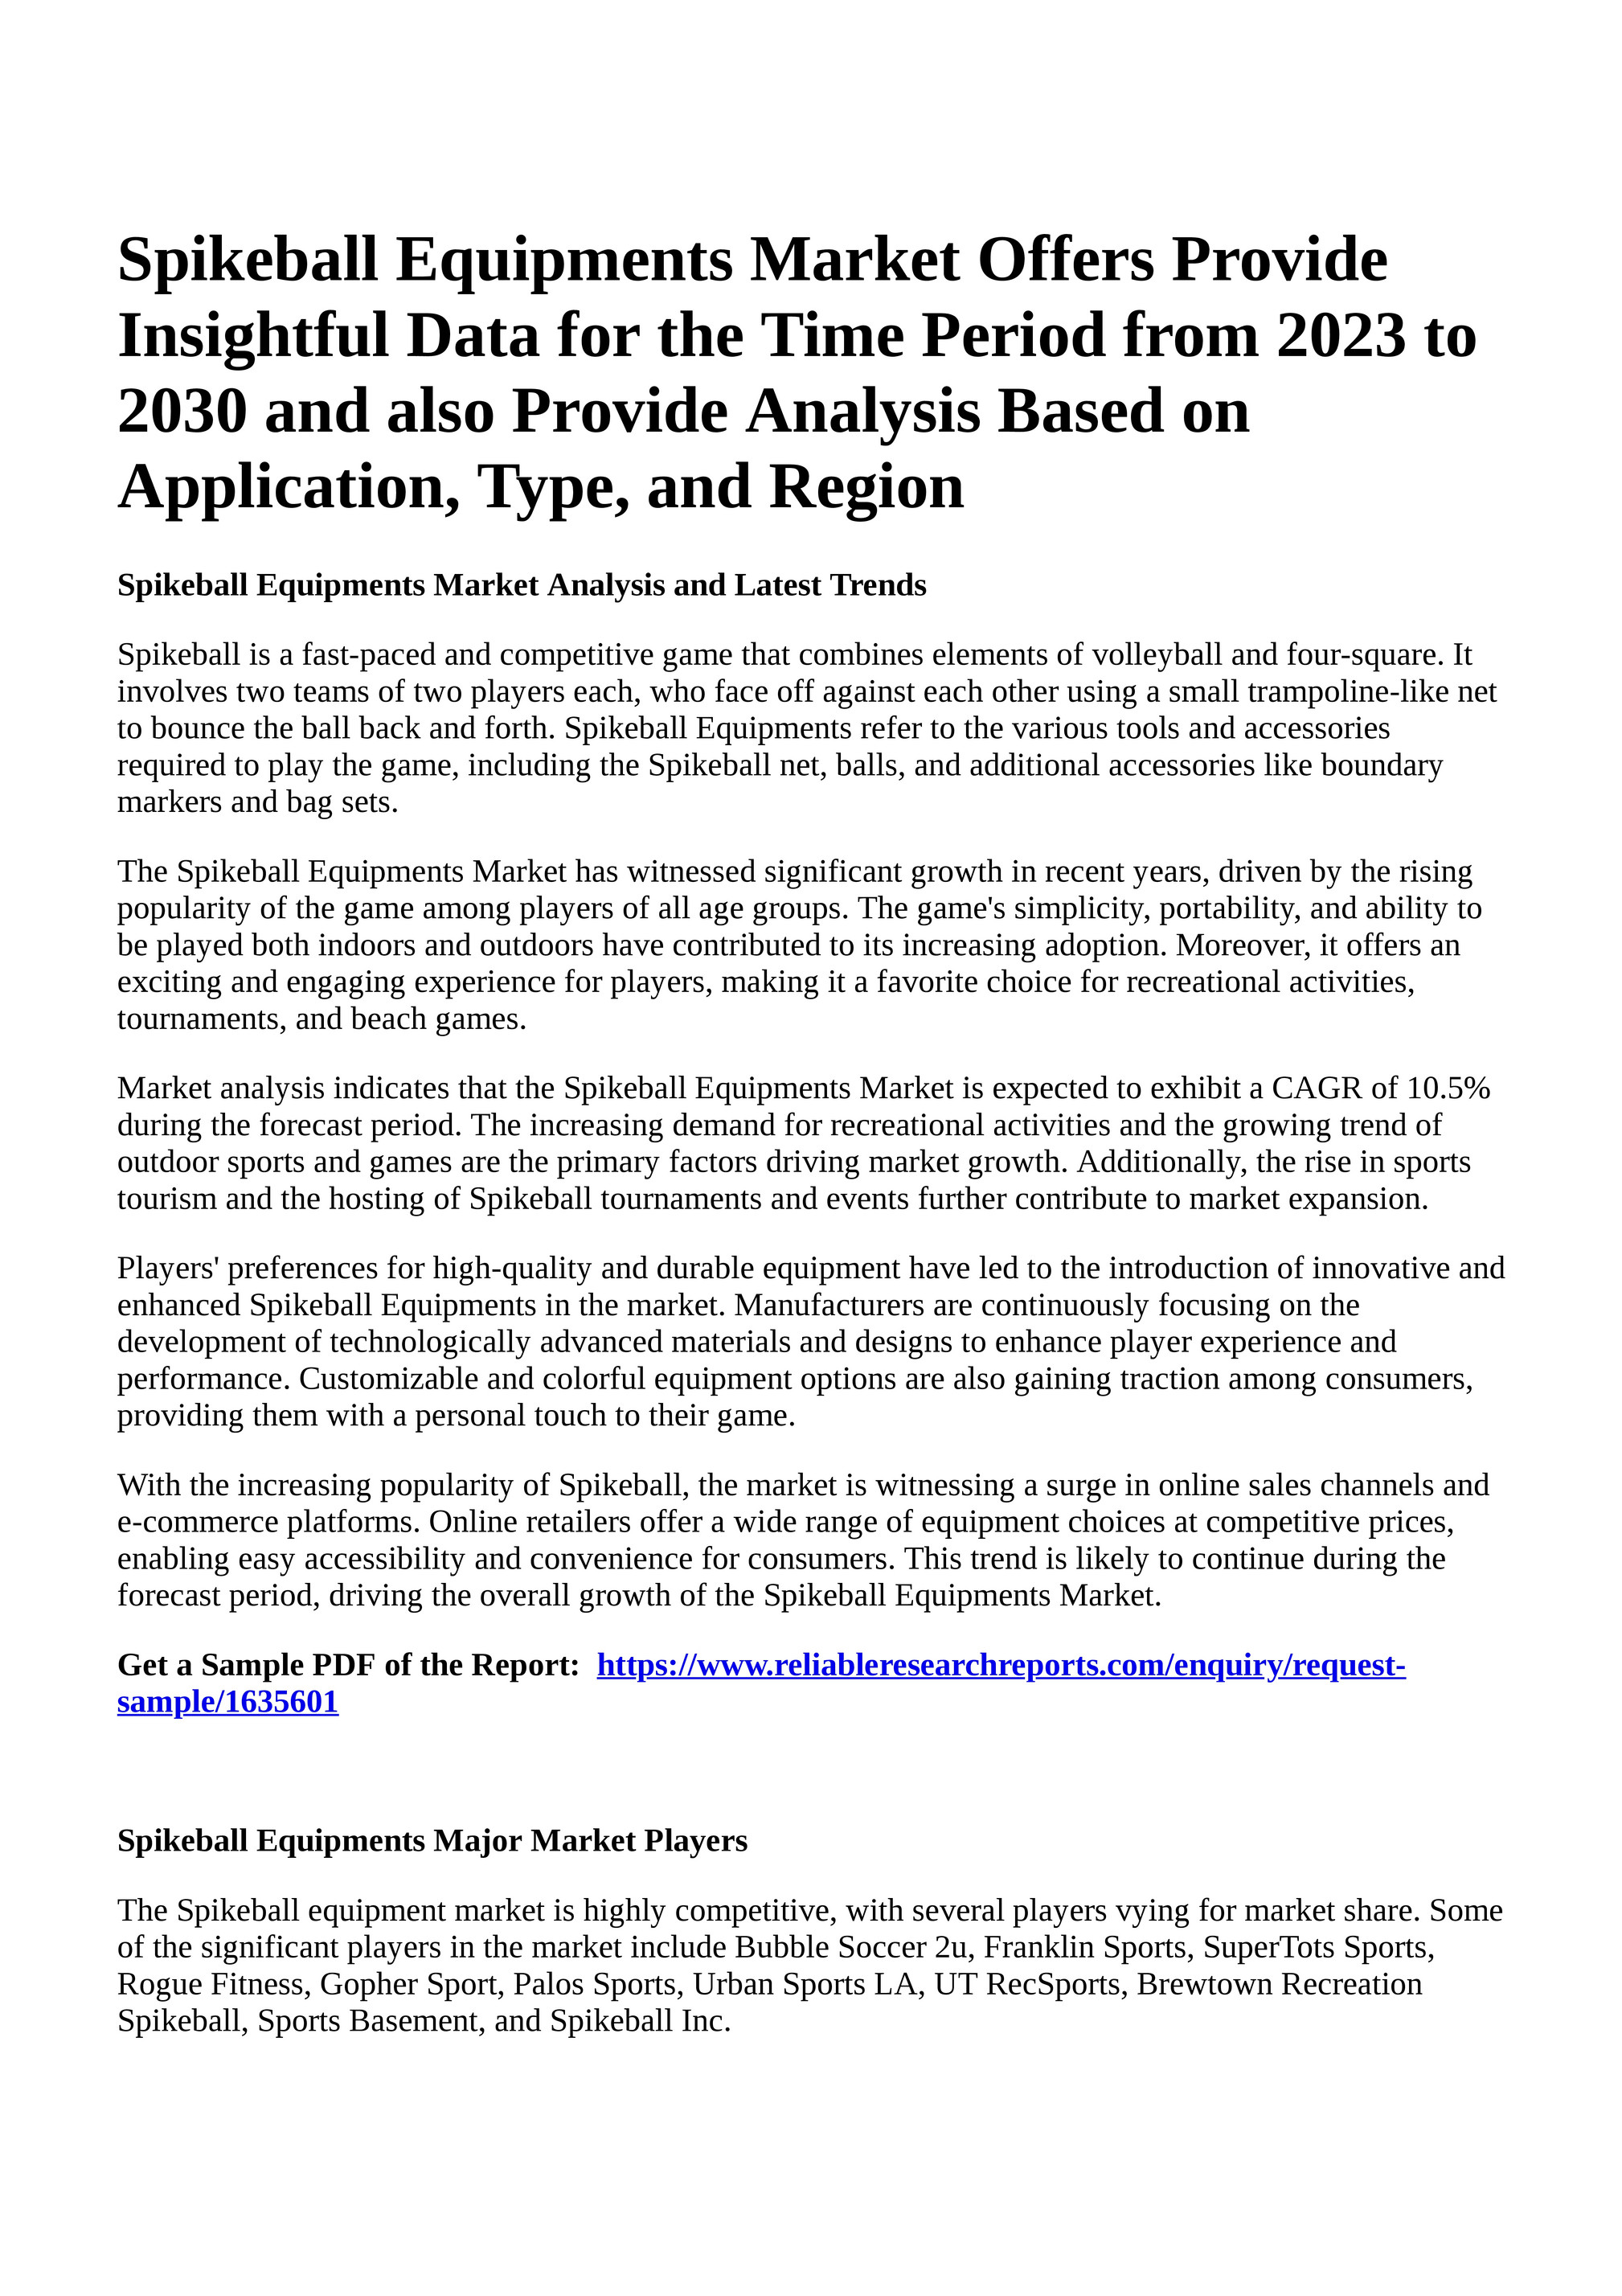 Reportprime - Spikeball Equipments Market Offers Provide Insightful Data  for the Time Period from 2023 to 2030 and also Provide Analysis Based on  Application, Type, and Region - Page 1